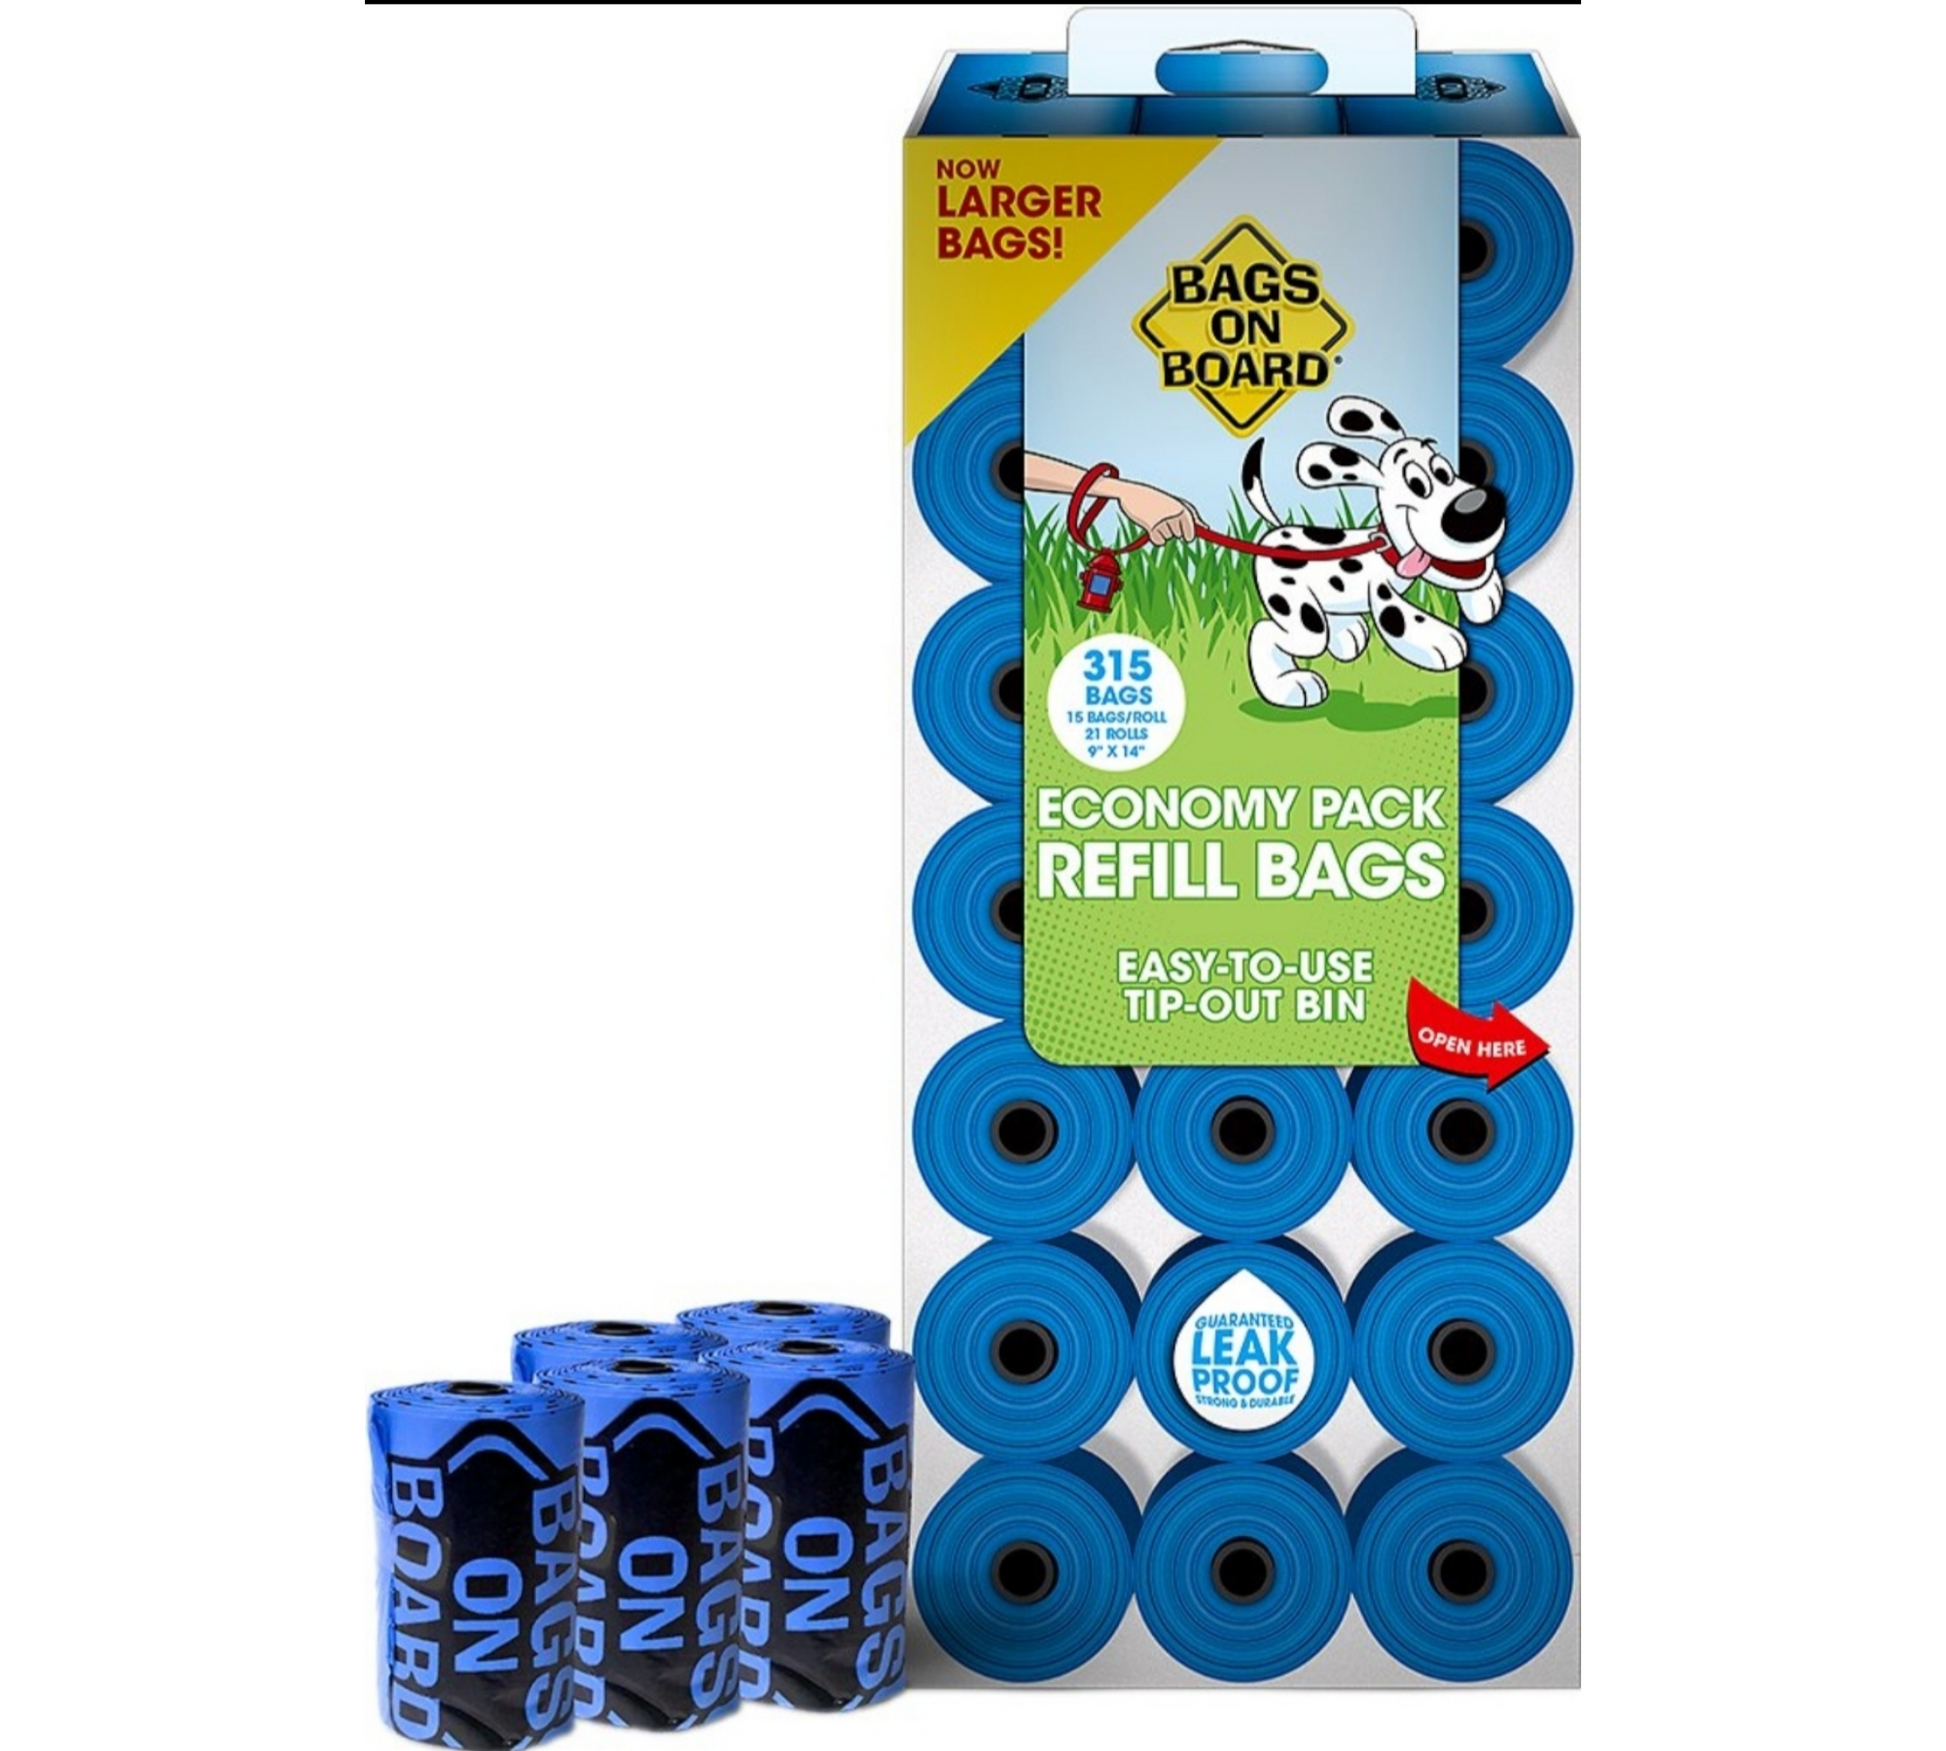 Canine's World Poop Bags Bags on Board Bag Refill Pack Bags On Board